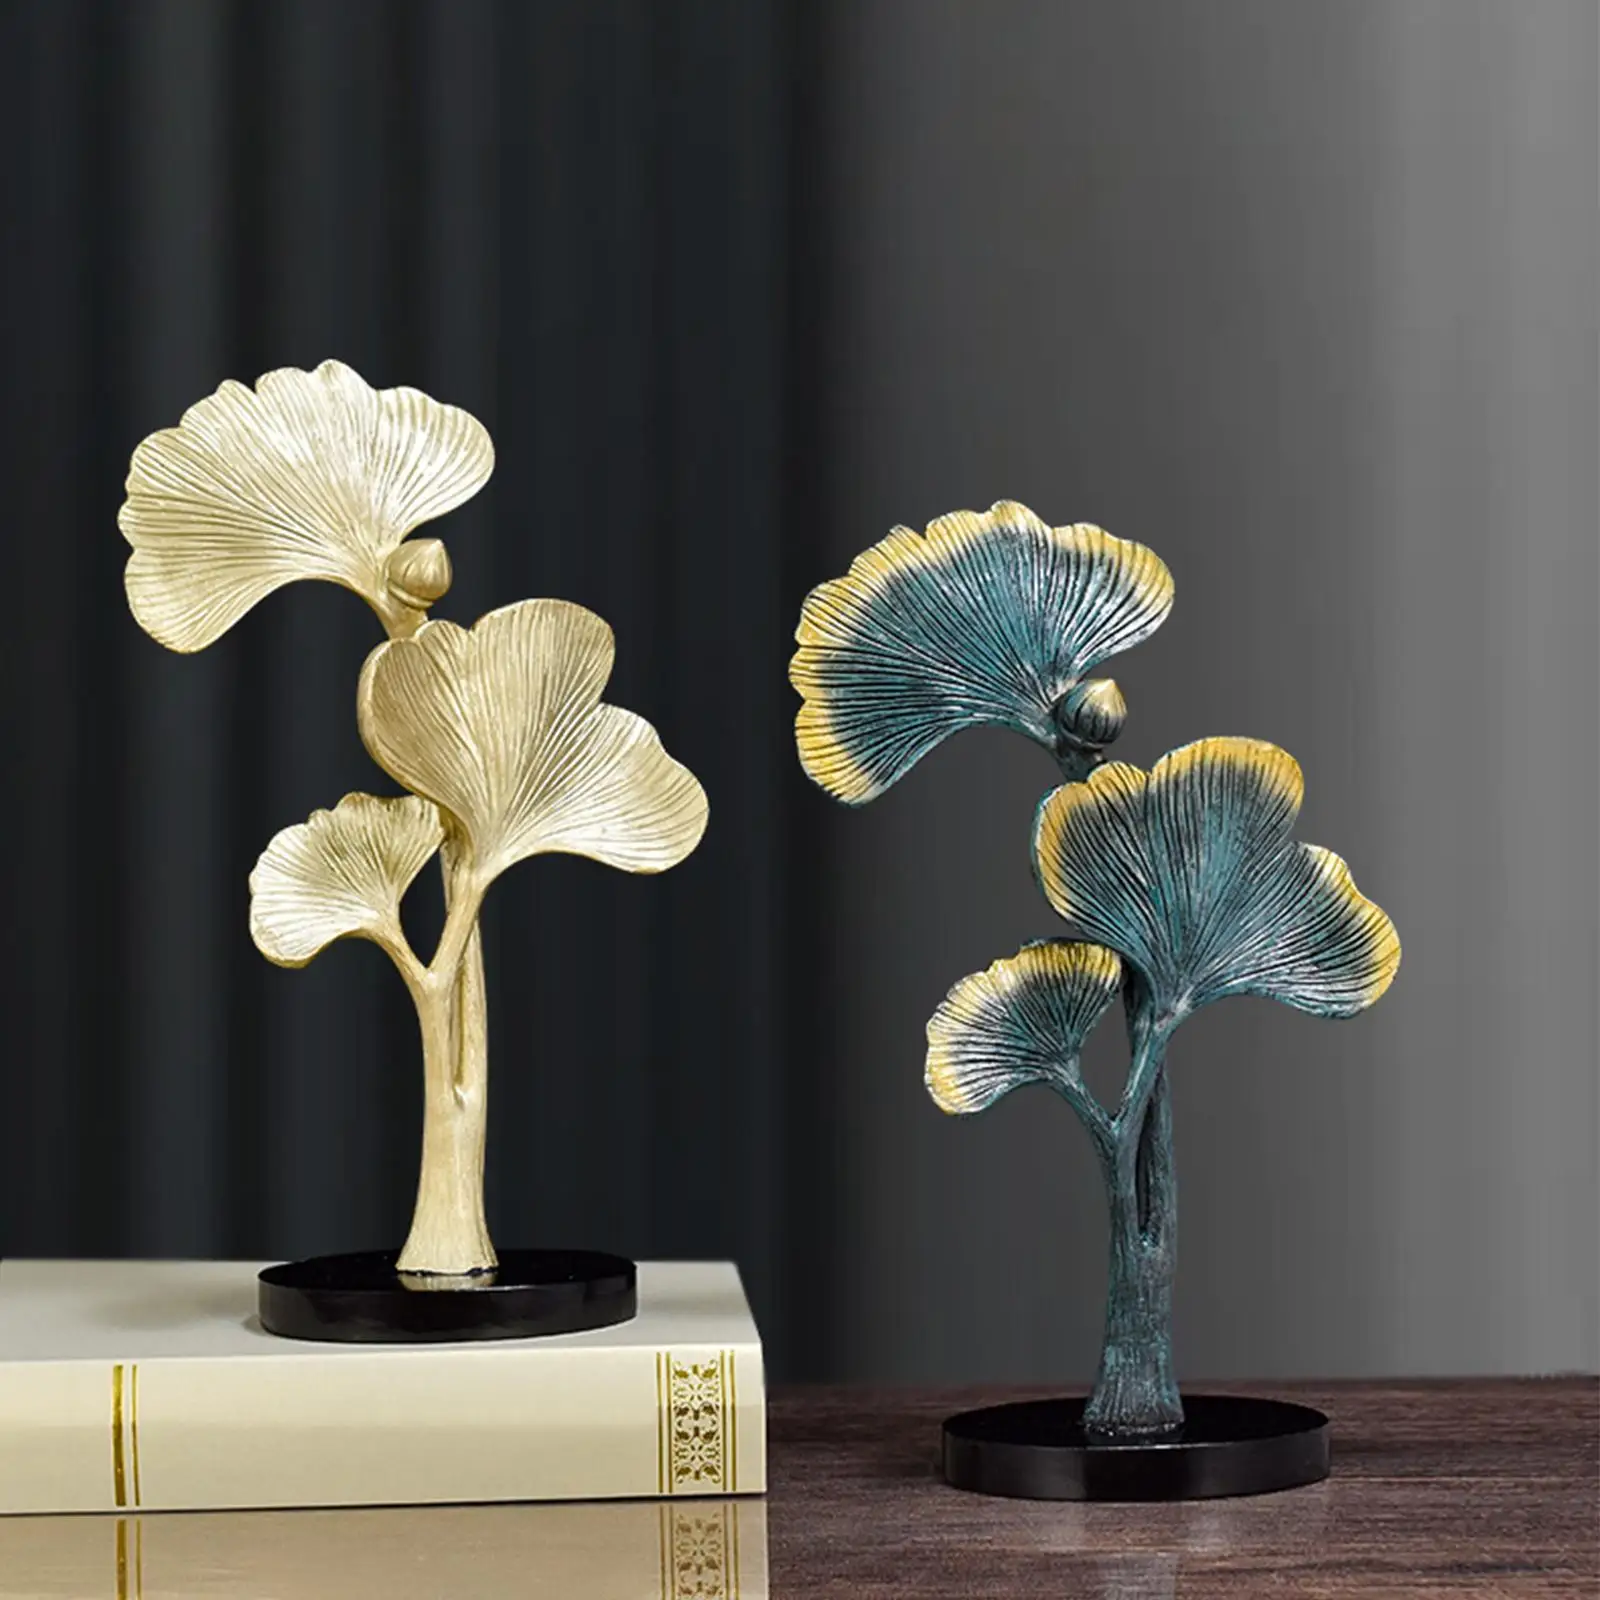 Gingko Leaf Ornament Sculpture Decorative Props with Base Furnishing Imitation Plant for Porch  Housewarming Decor